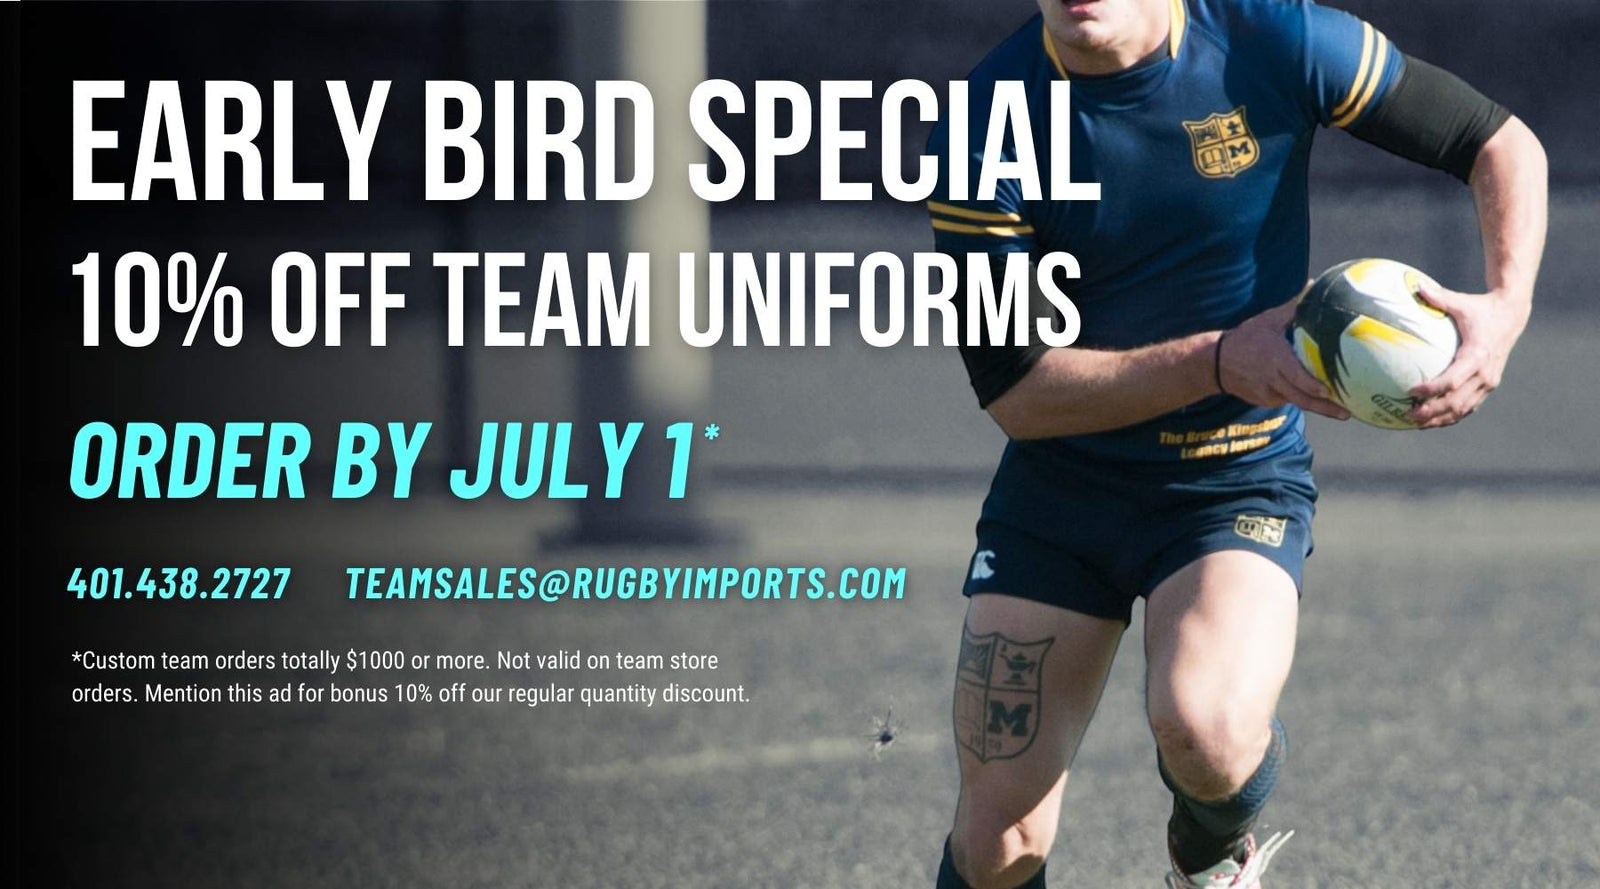 Rugby Imports - Authentic Rugby gear, Teamwear